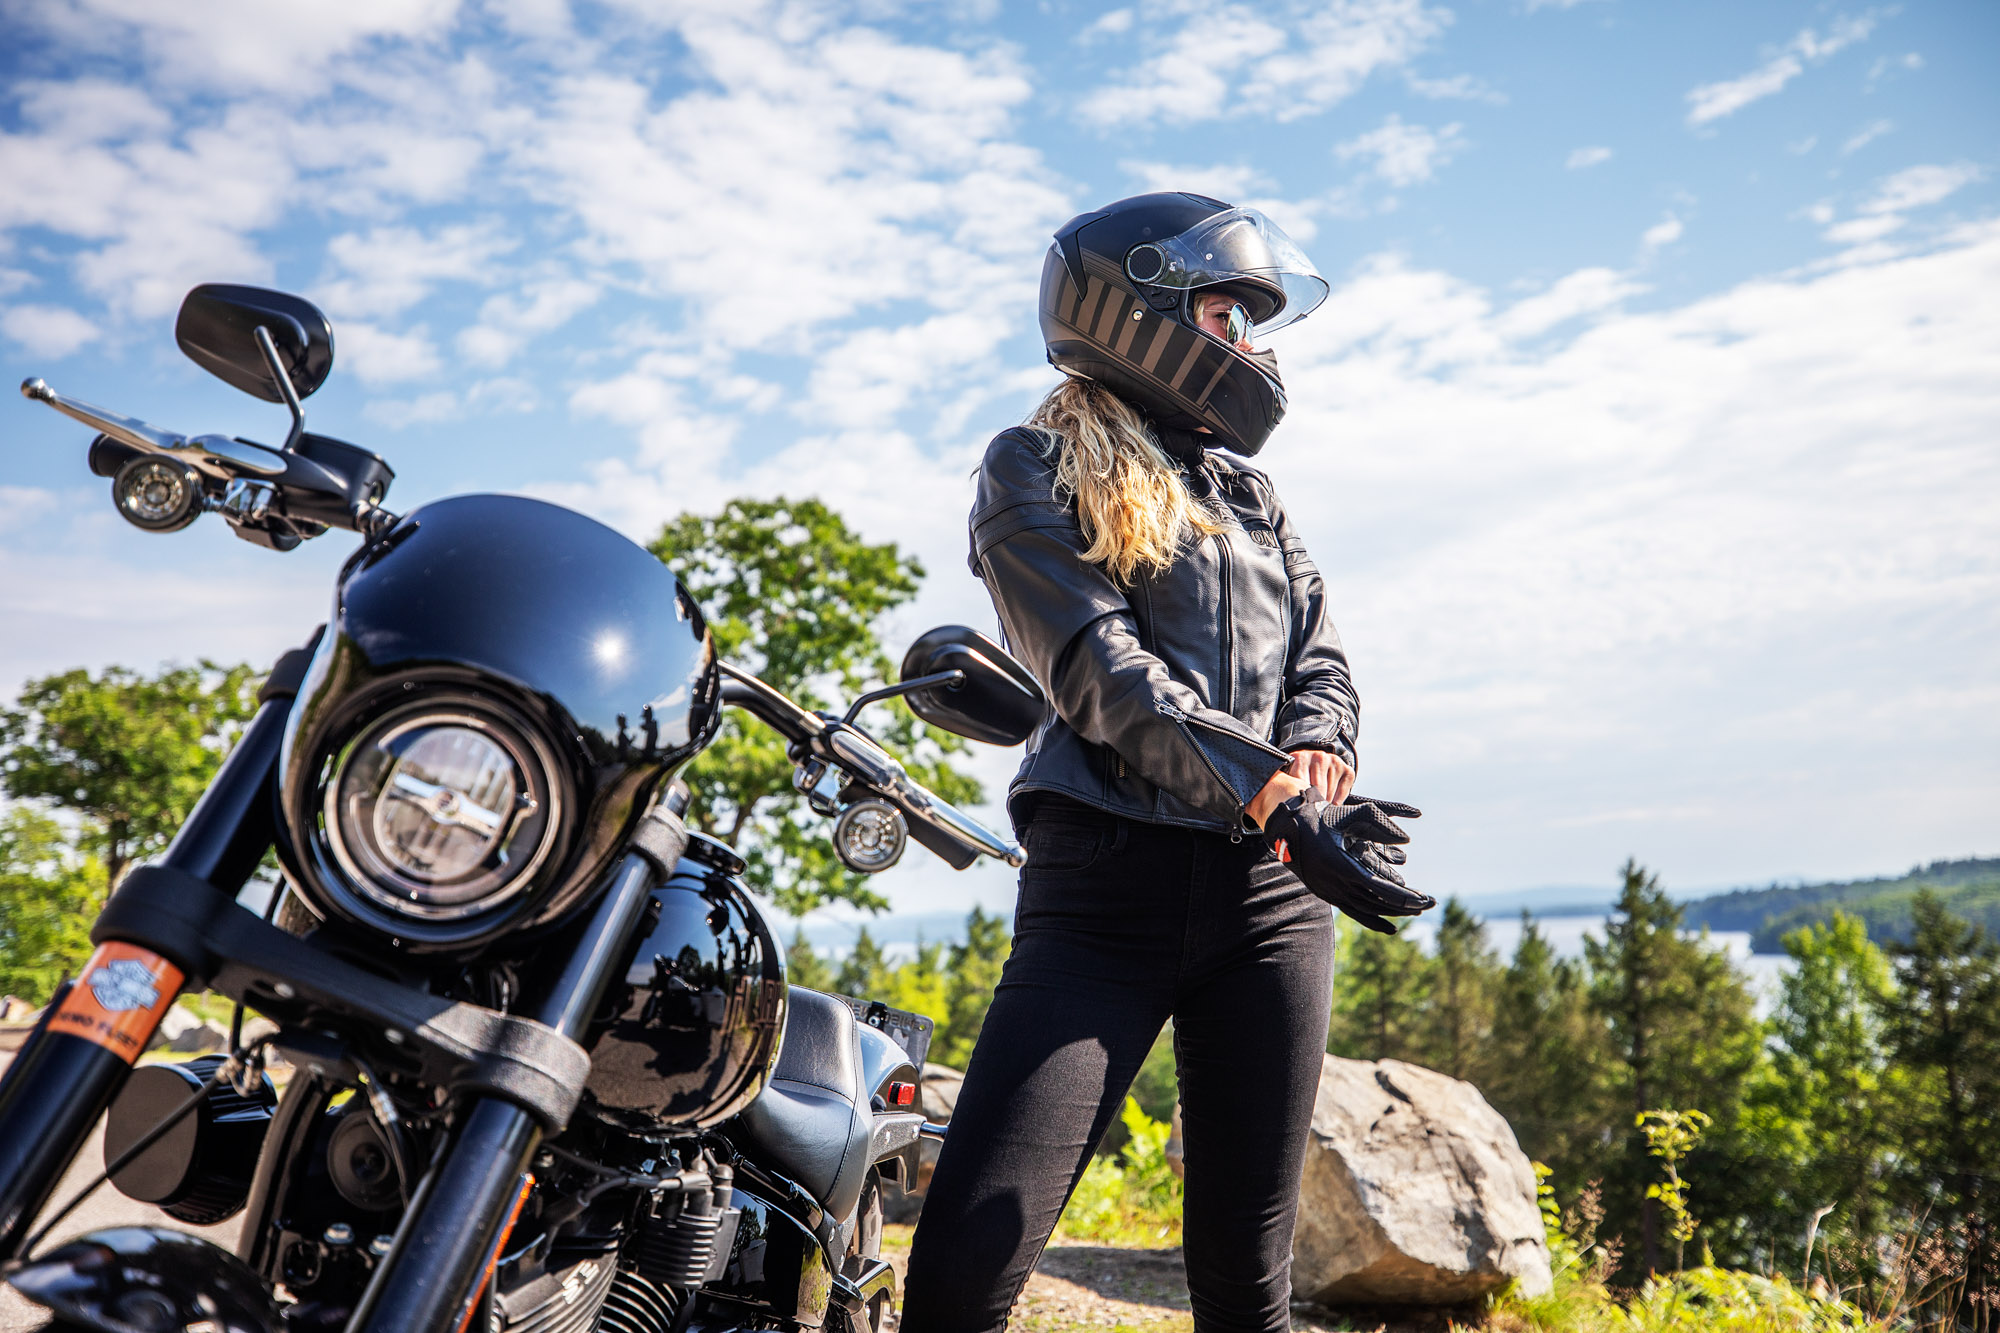 Women motorcycle rider by Boston based commercial lifestyle photographer Brian Nevins